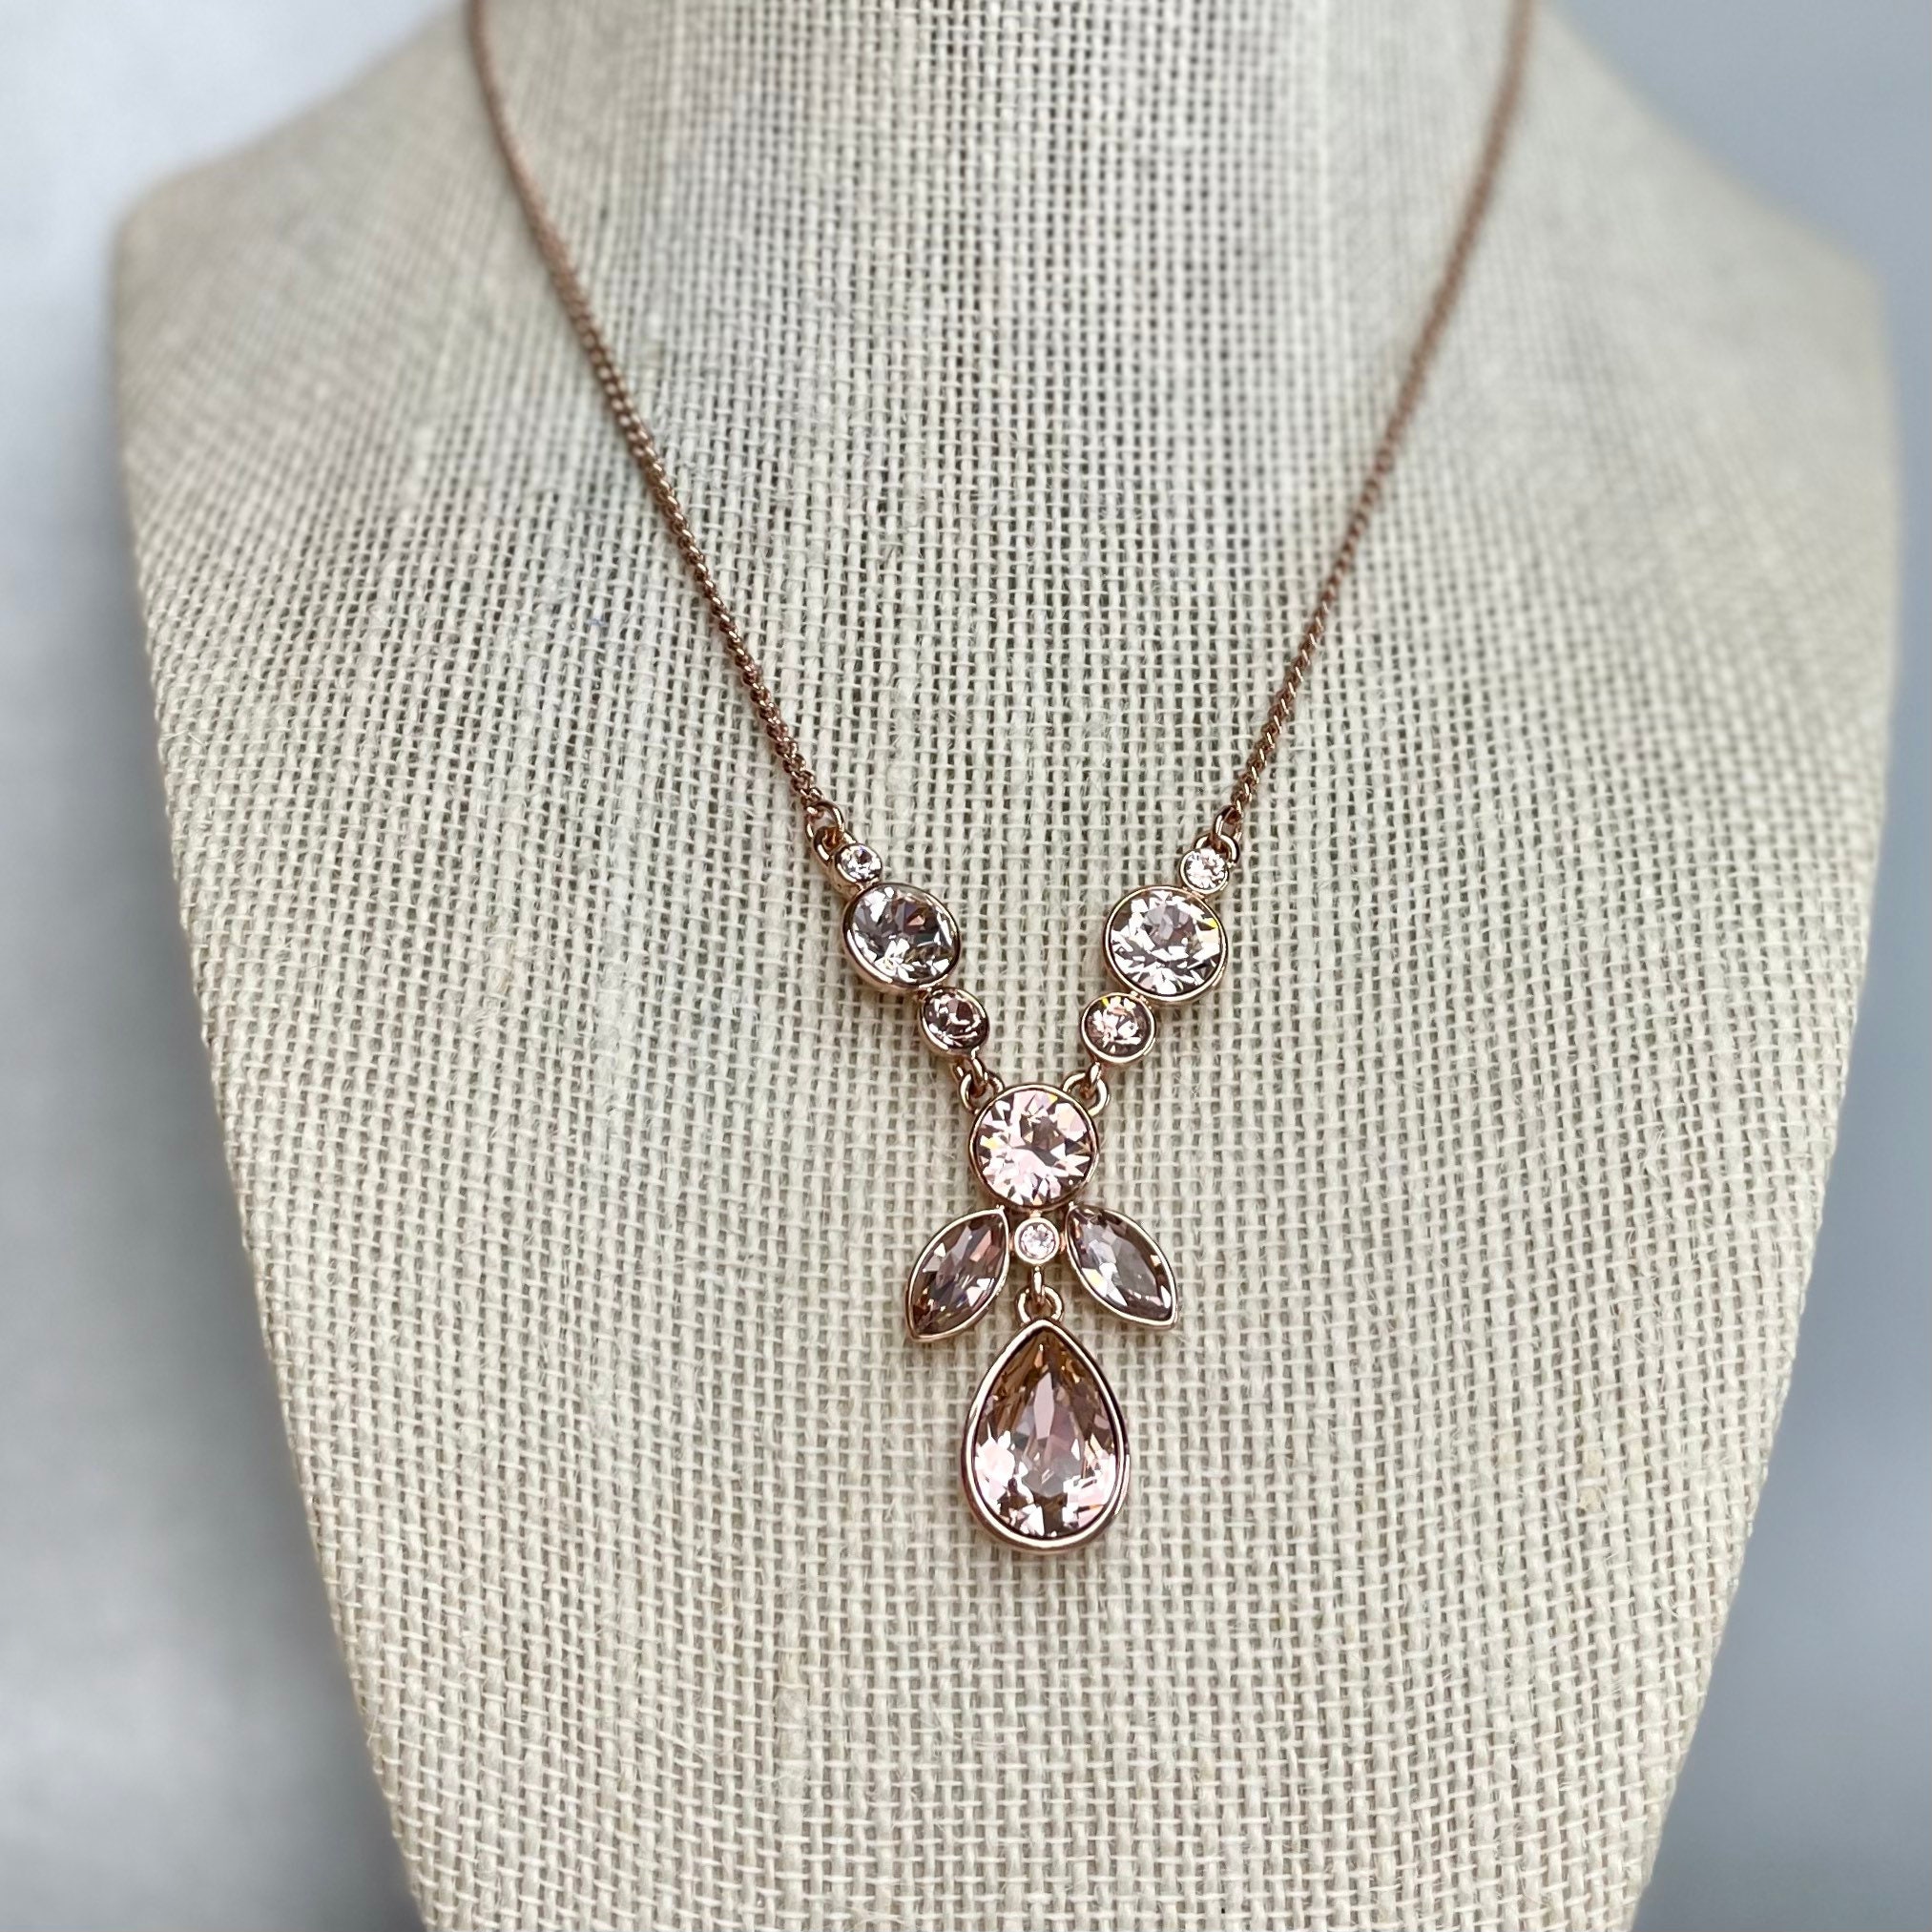 Buy Givenchy Rose Gold Pendant Necklace, Pave Clear Rhinestones, 1990s  Vintage Jewelry Online in India - Etsy